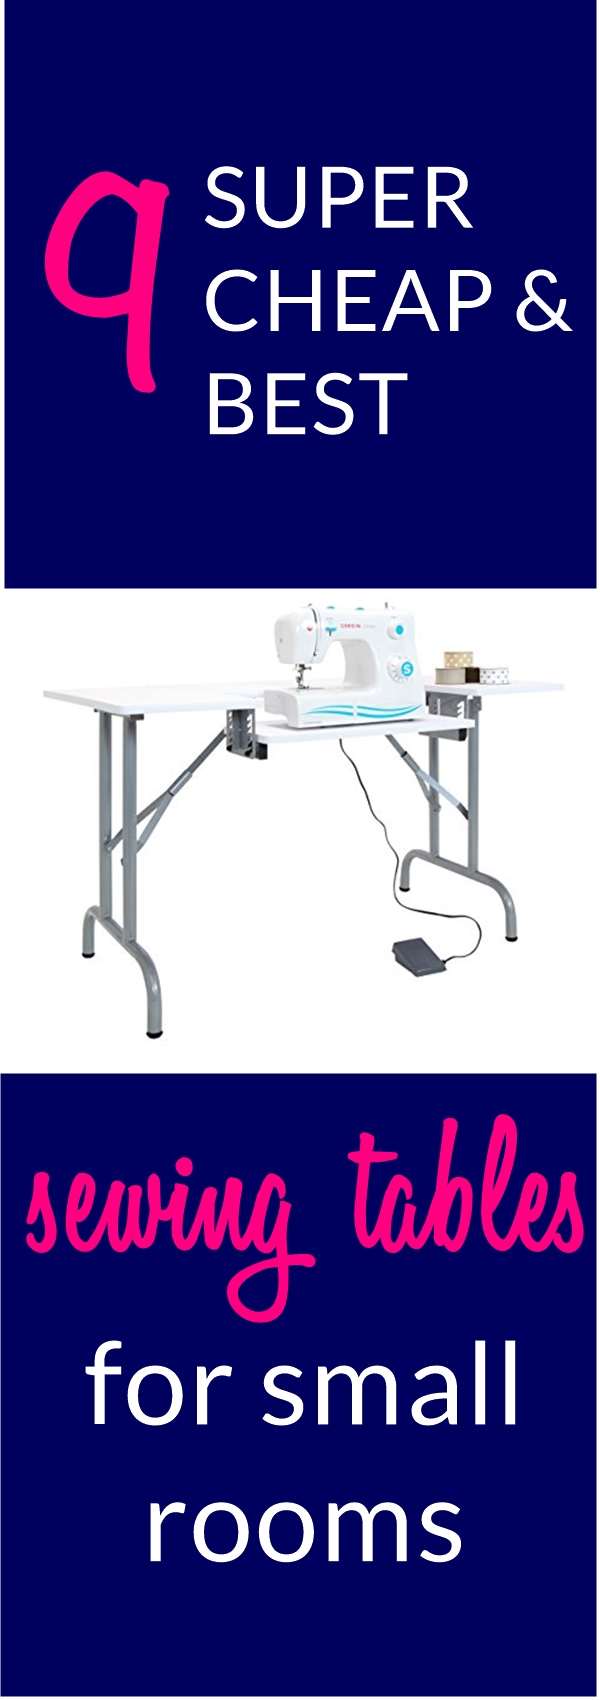 sewing cutting table | CHEAP SEWING tables | sewing machine tables | sewing tables | 